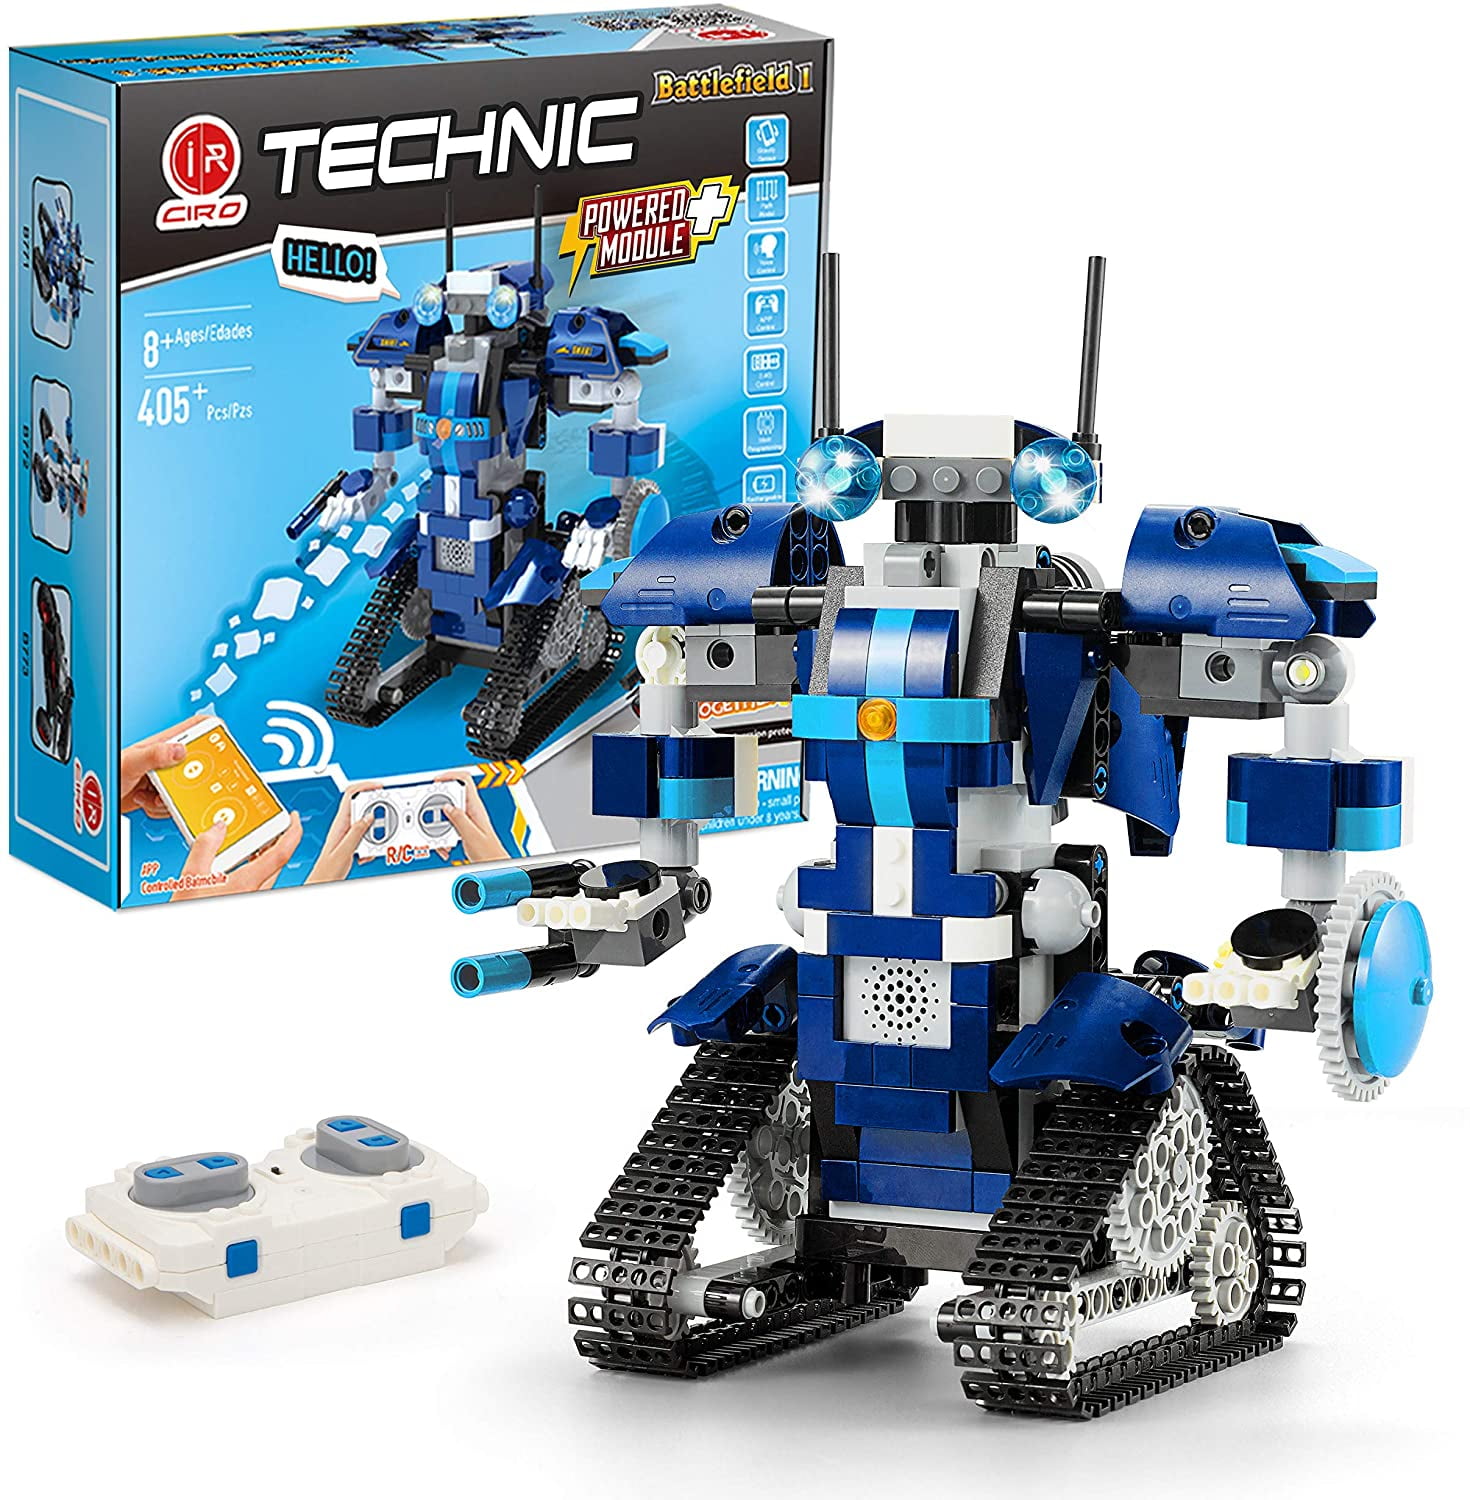 Remote Controlled Coding Engineering Kits Gift for Boys and Girls Ages 8-12 STEM Project Robot Building Toys for Kids 405 Pieces 